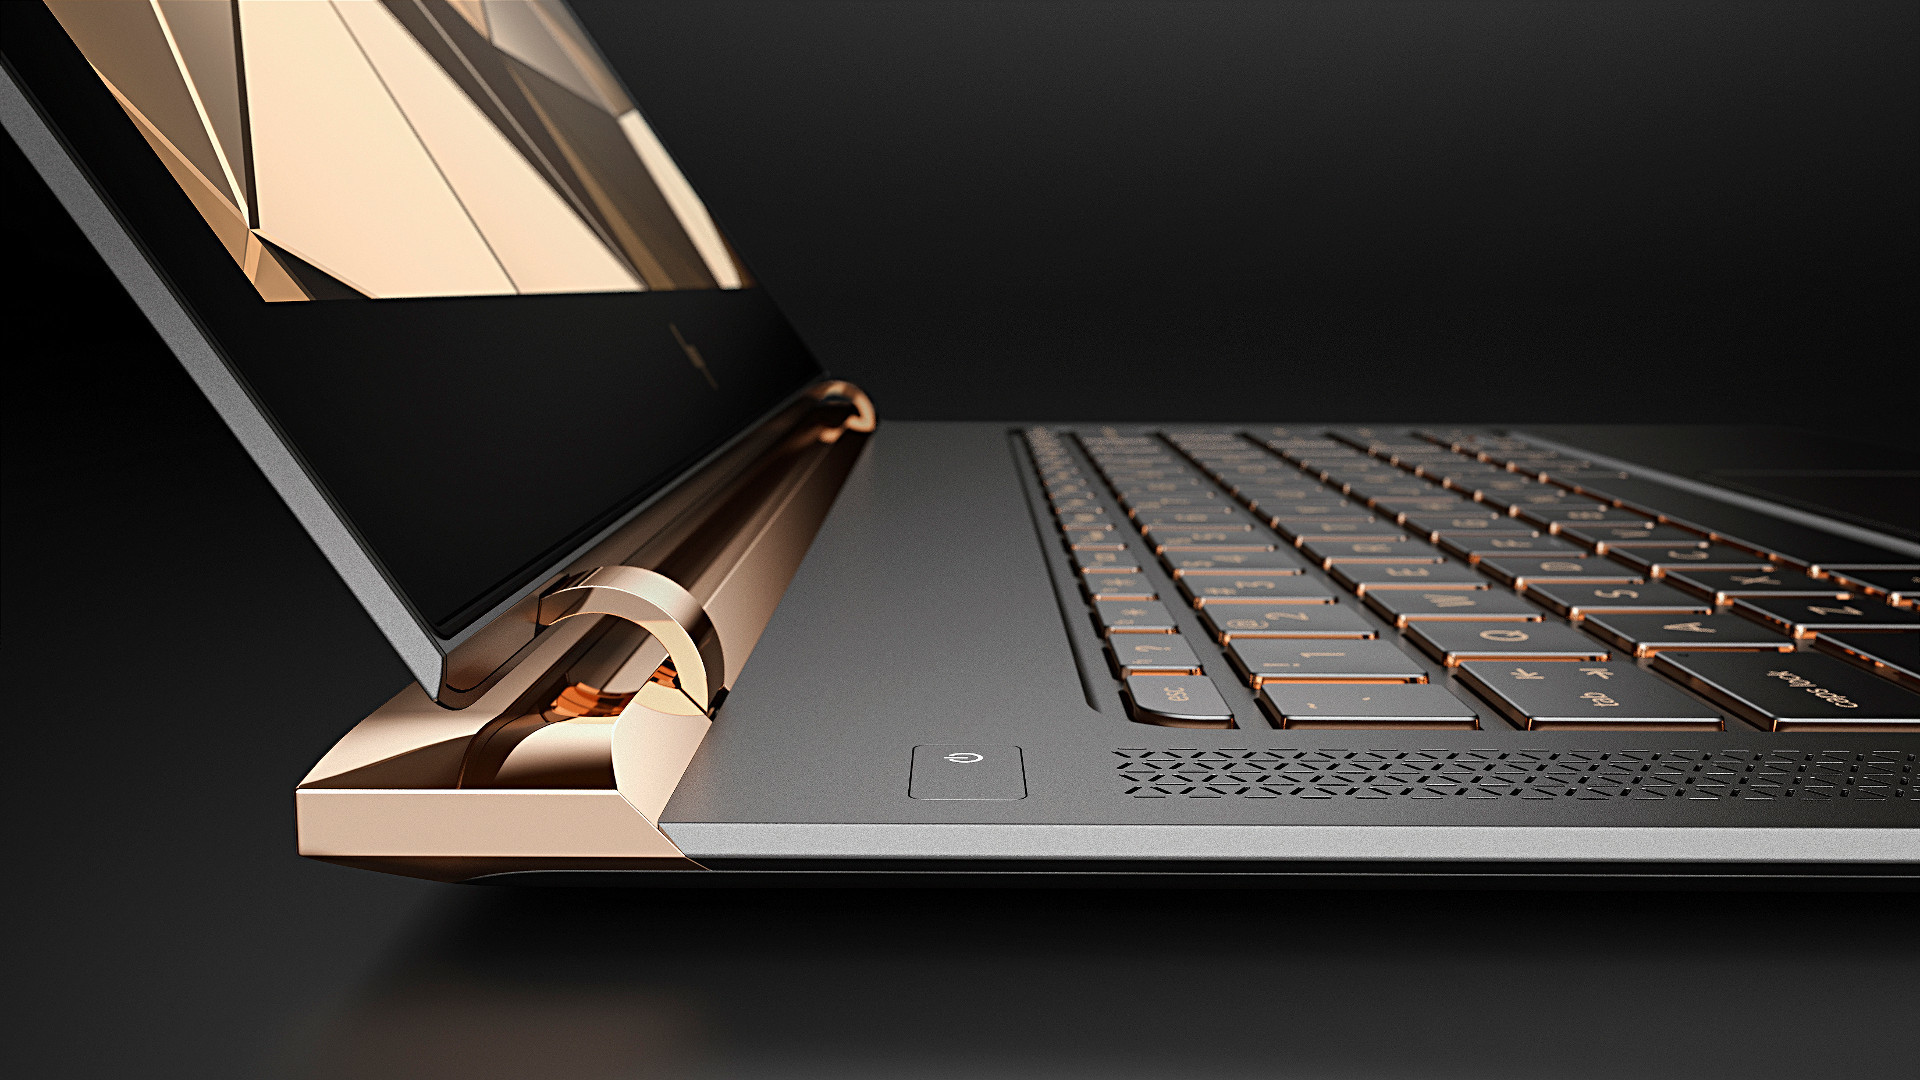 1920x1080 ... 63 Hp Spectre Wallpapers on WallpaperPlay